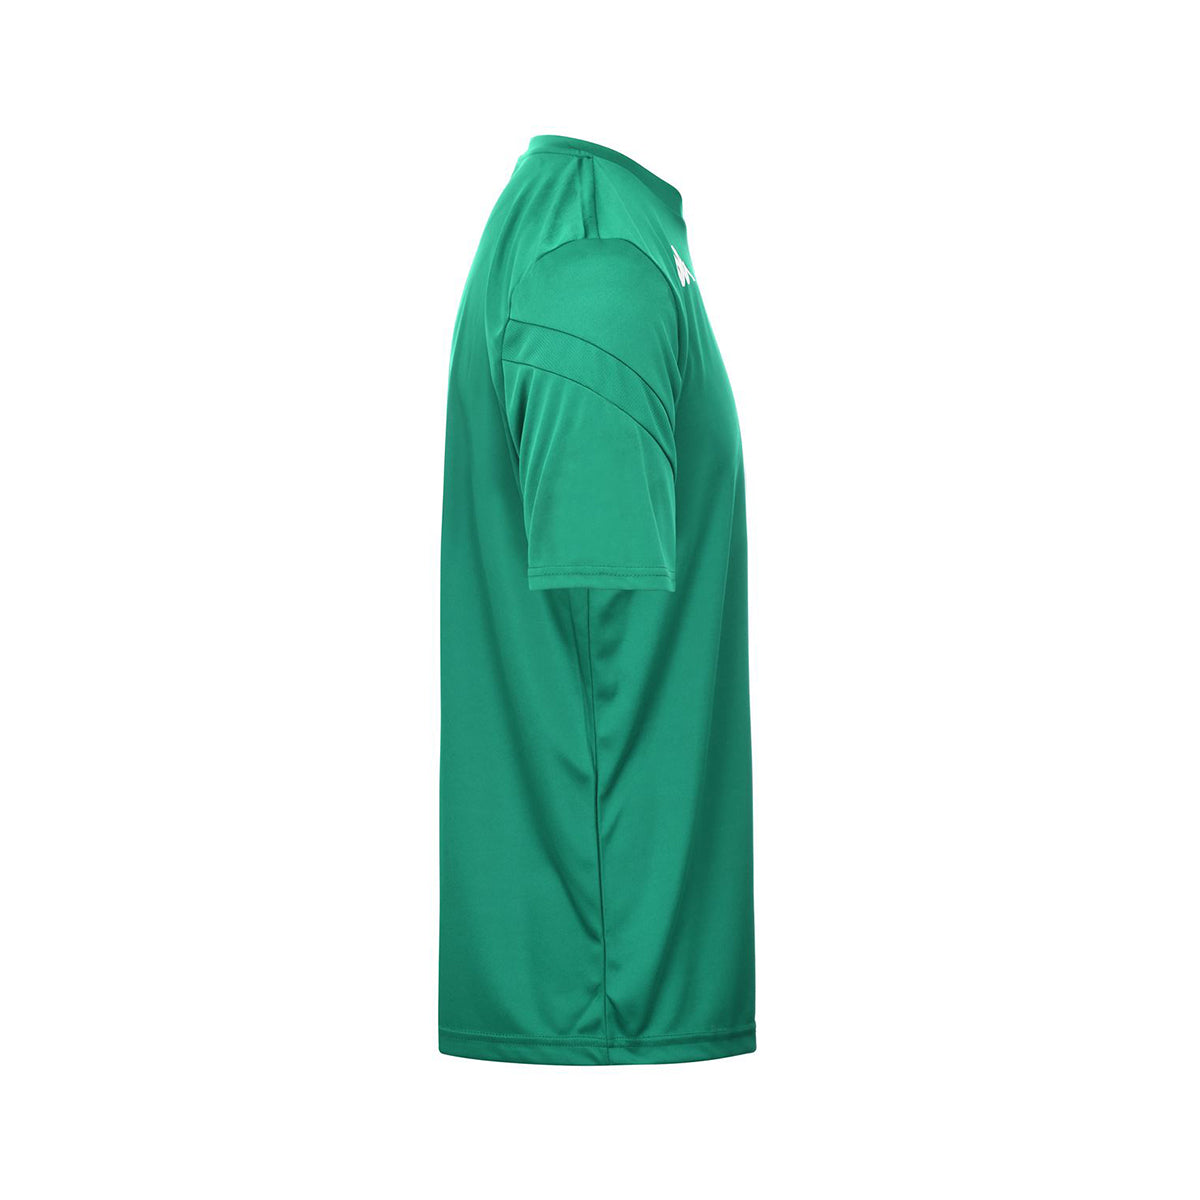 Maillot Dovo Vert Homme - Image 2